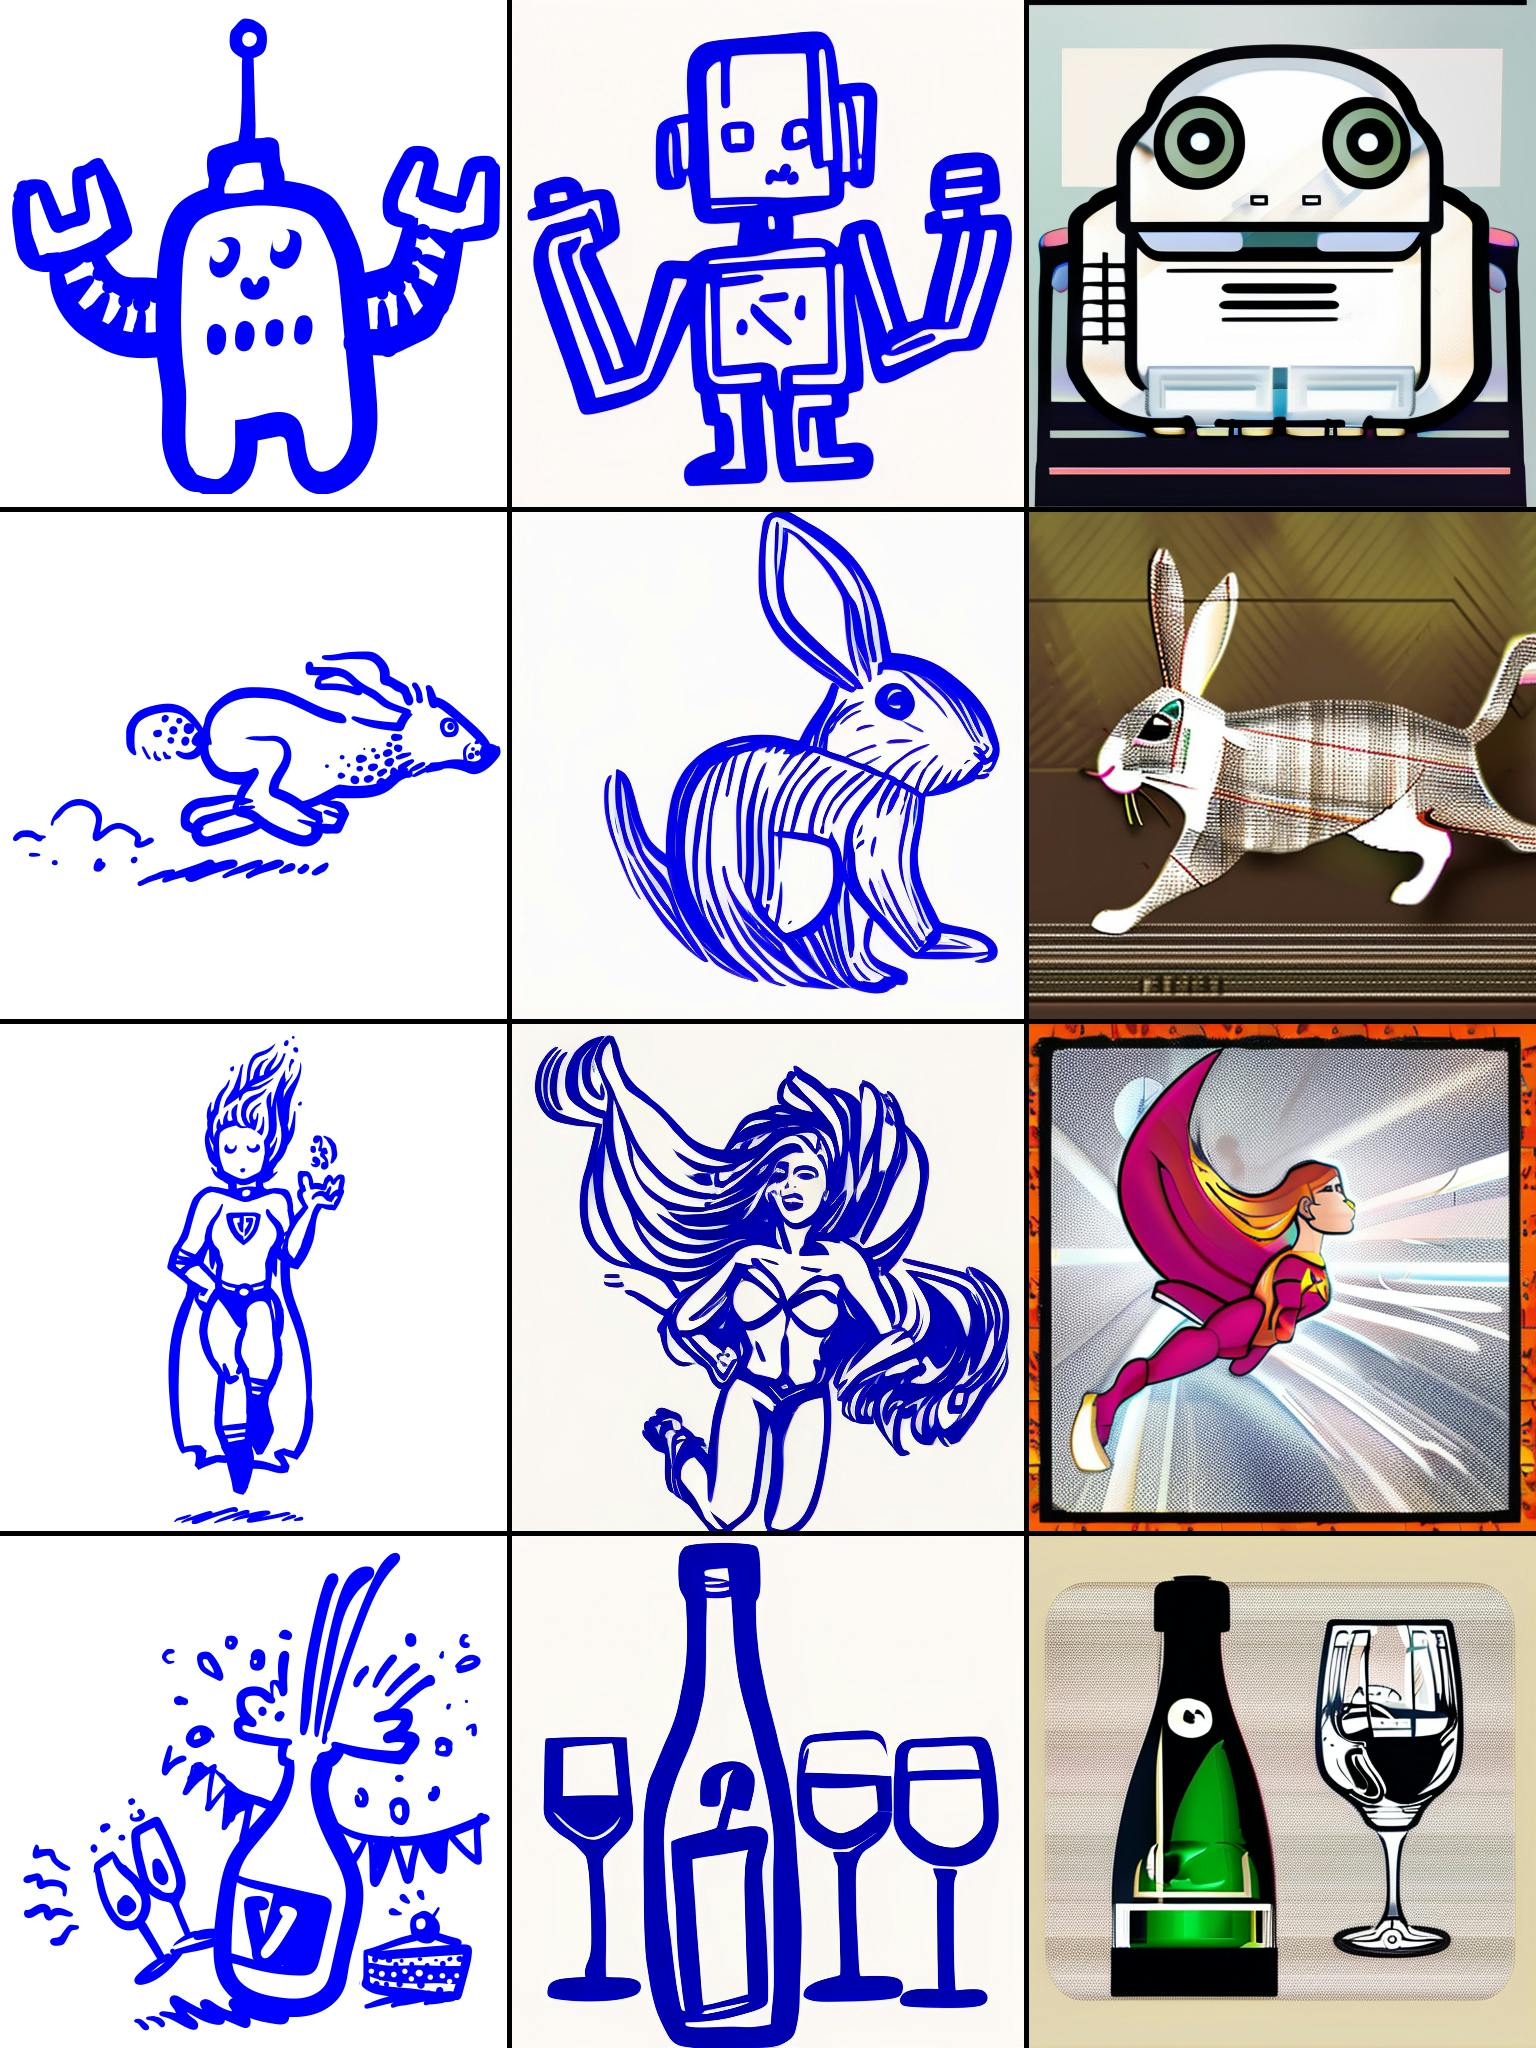 Illustrations of a robot, rabbit, superwomen and champagne bottle with glasses